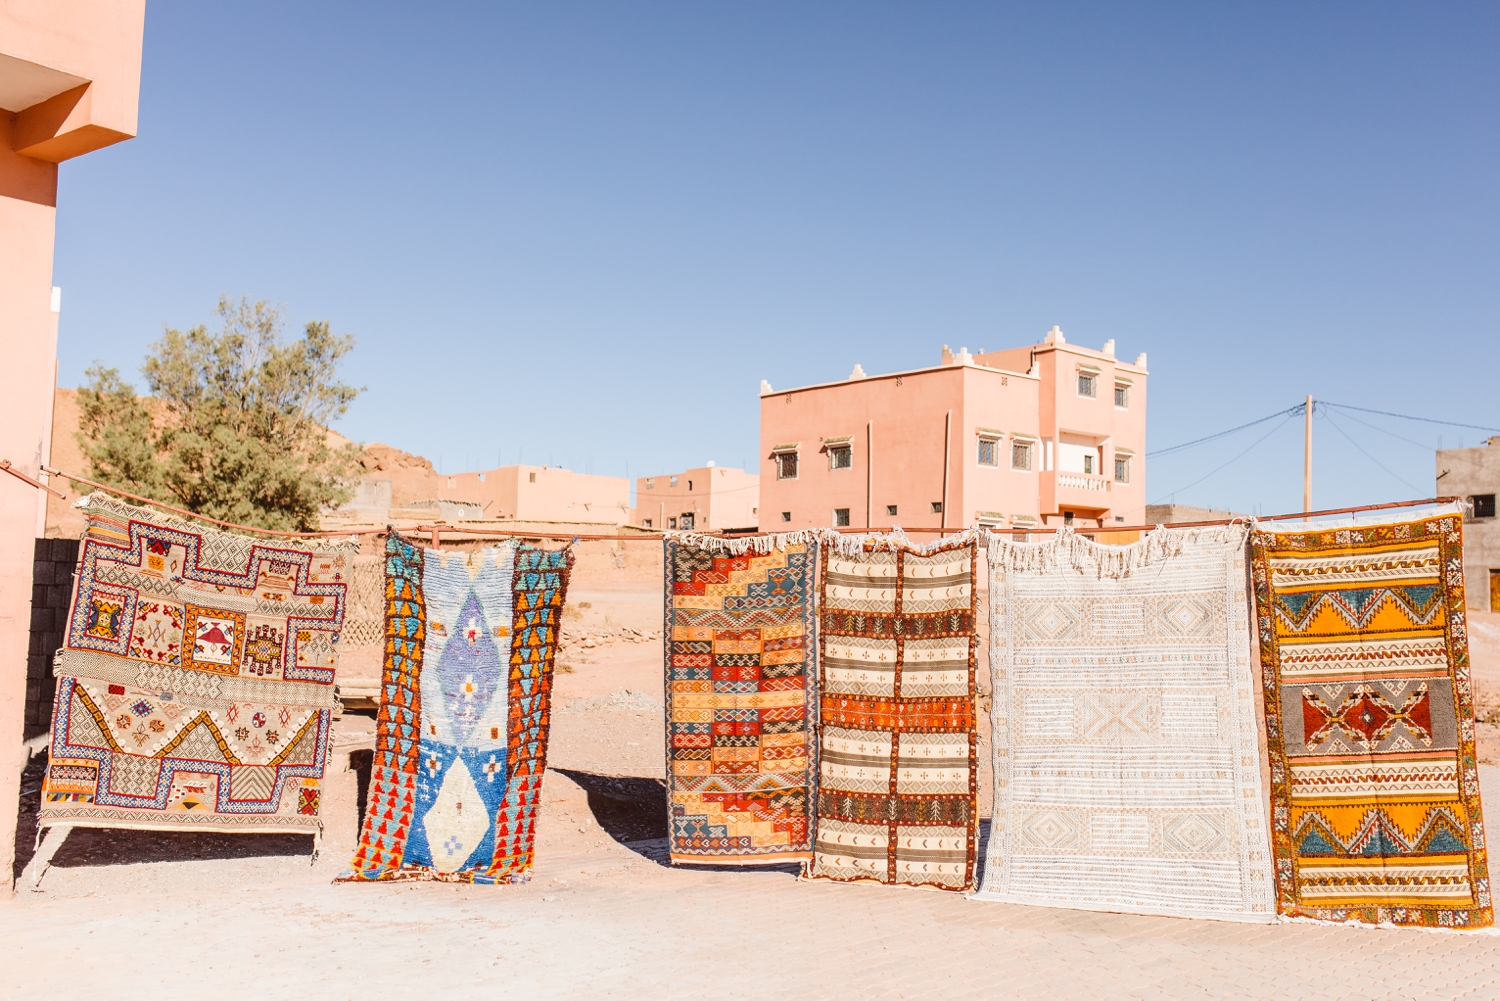 Photo taken by travel photographer of colorful rugs hanging on line outside in Marrakesh, Morocco | Brooke Michelle Photography